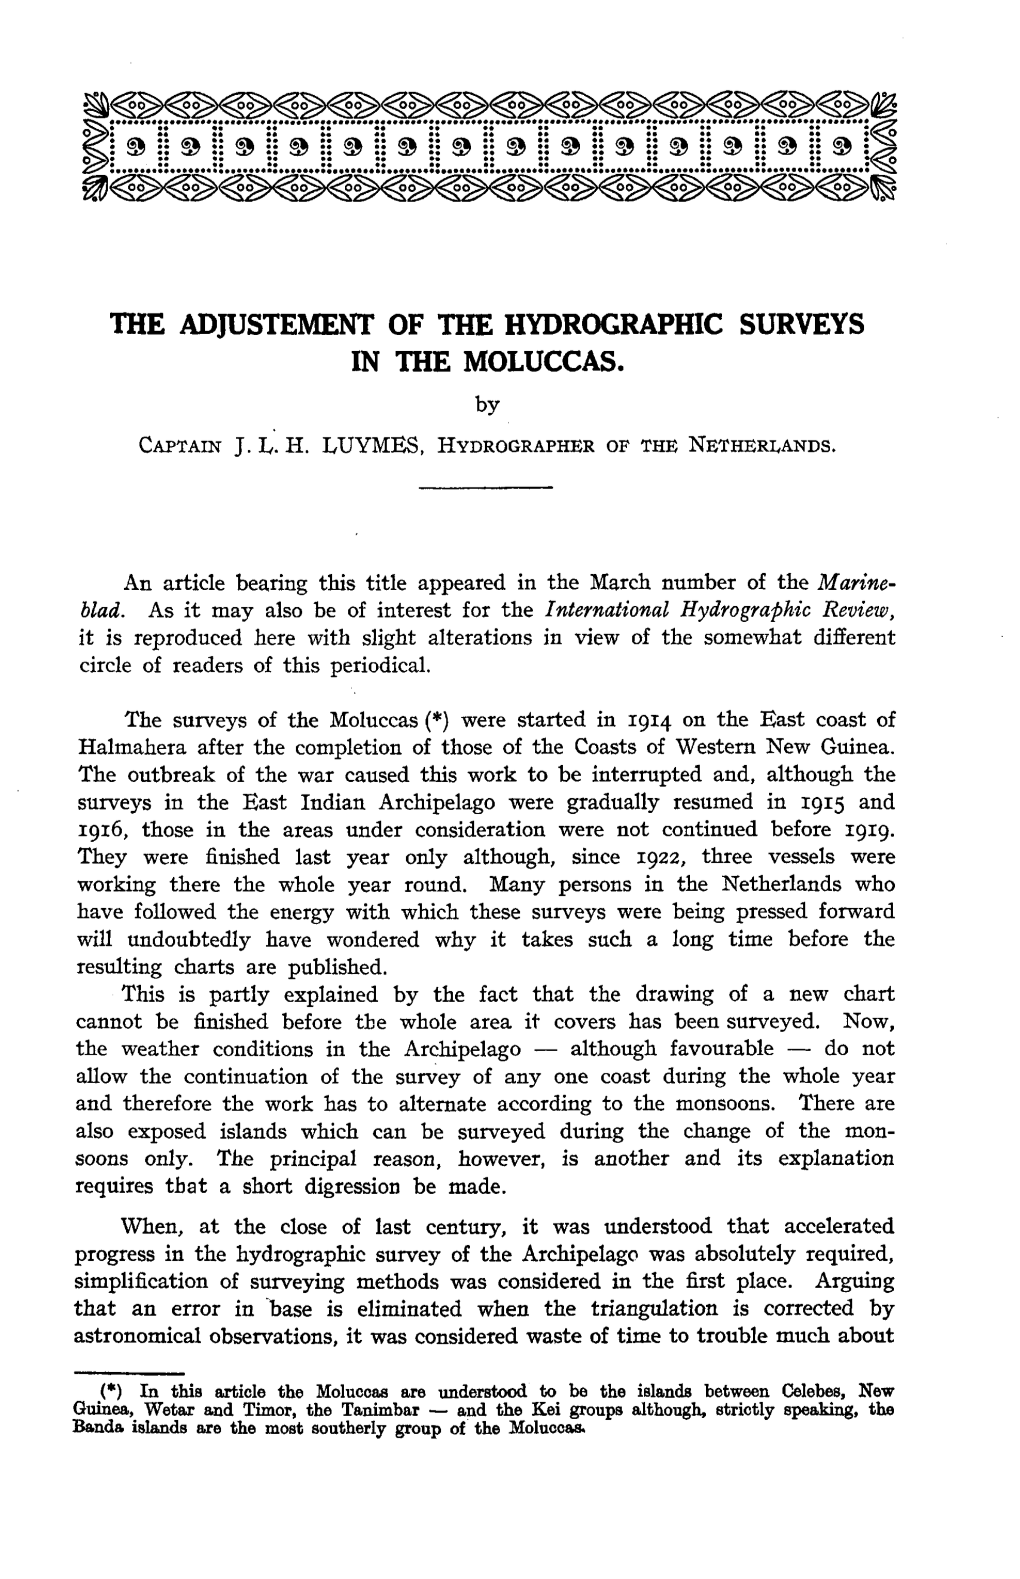 The Adjustement of the Hydrographic Surveys in the Moluccas